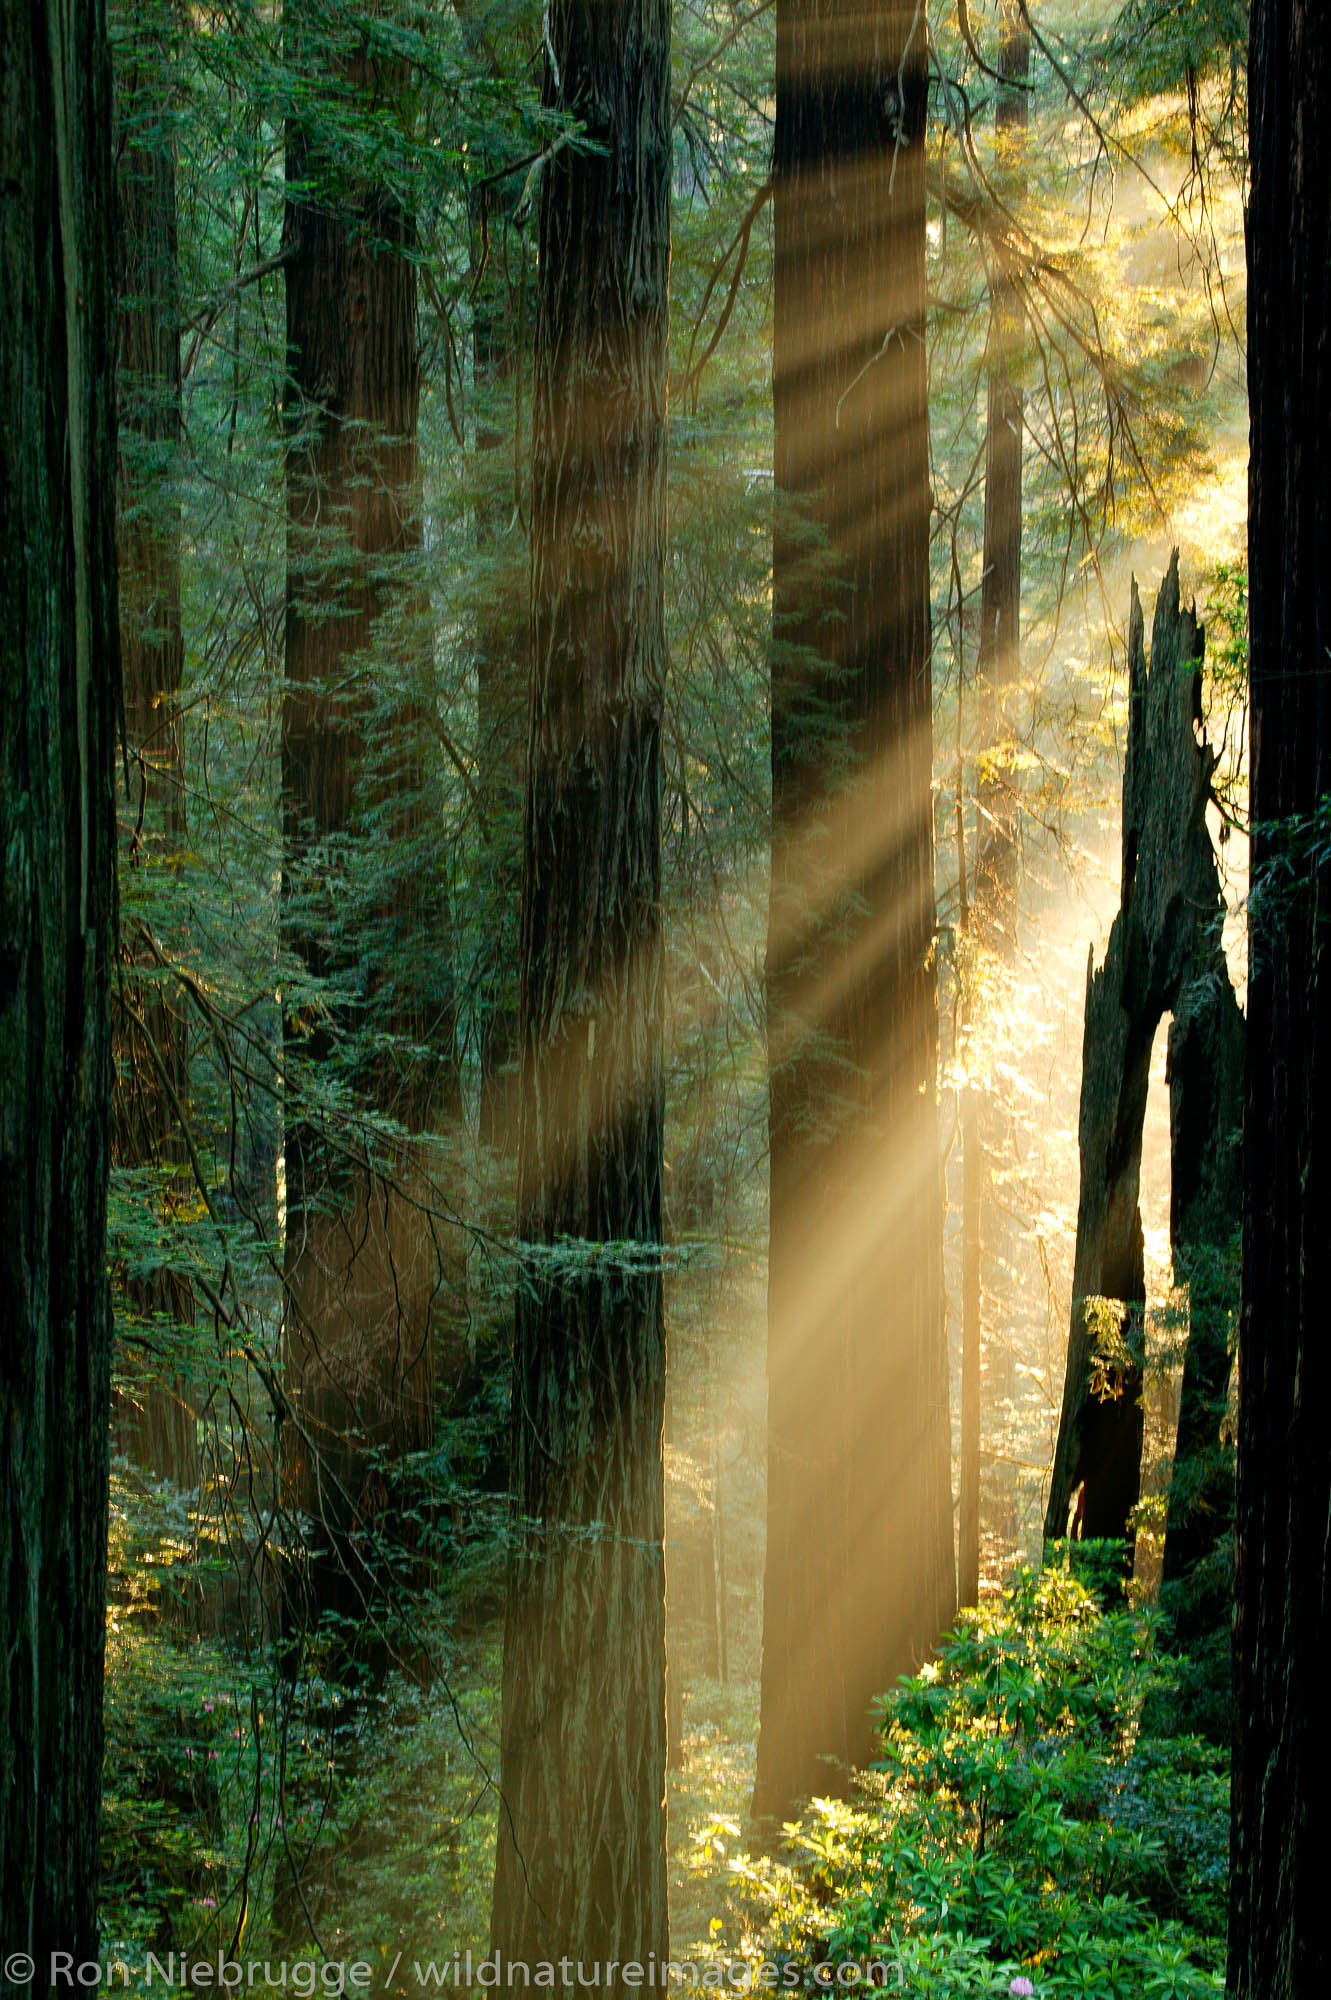 Morning light, Del Norte Coast Redwoods State Park, part of the Redwoods State and National Parks, California.